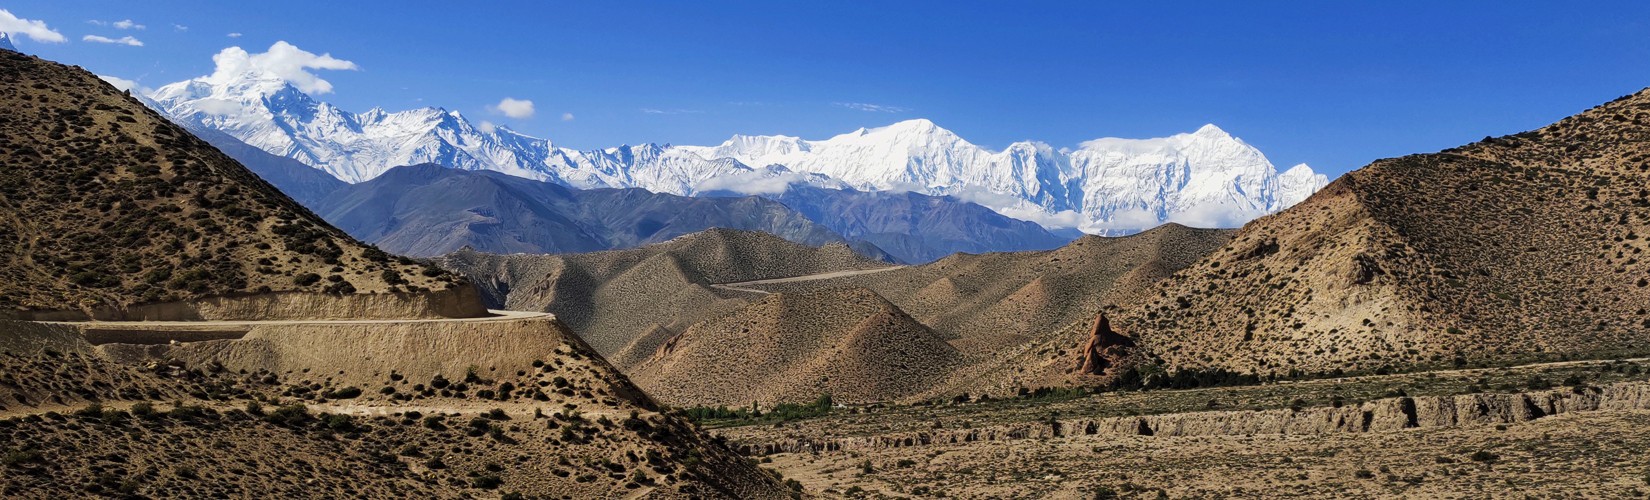 A Dream place for homies and outsider: Upper Mustang, Nepal